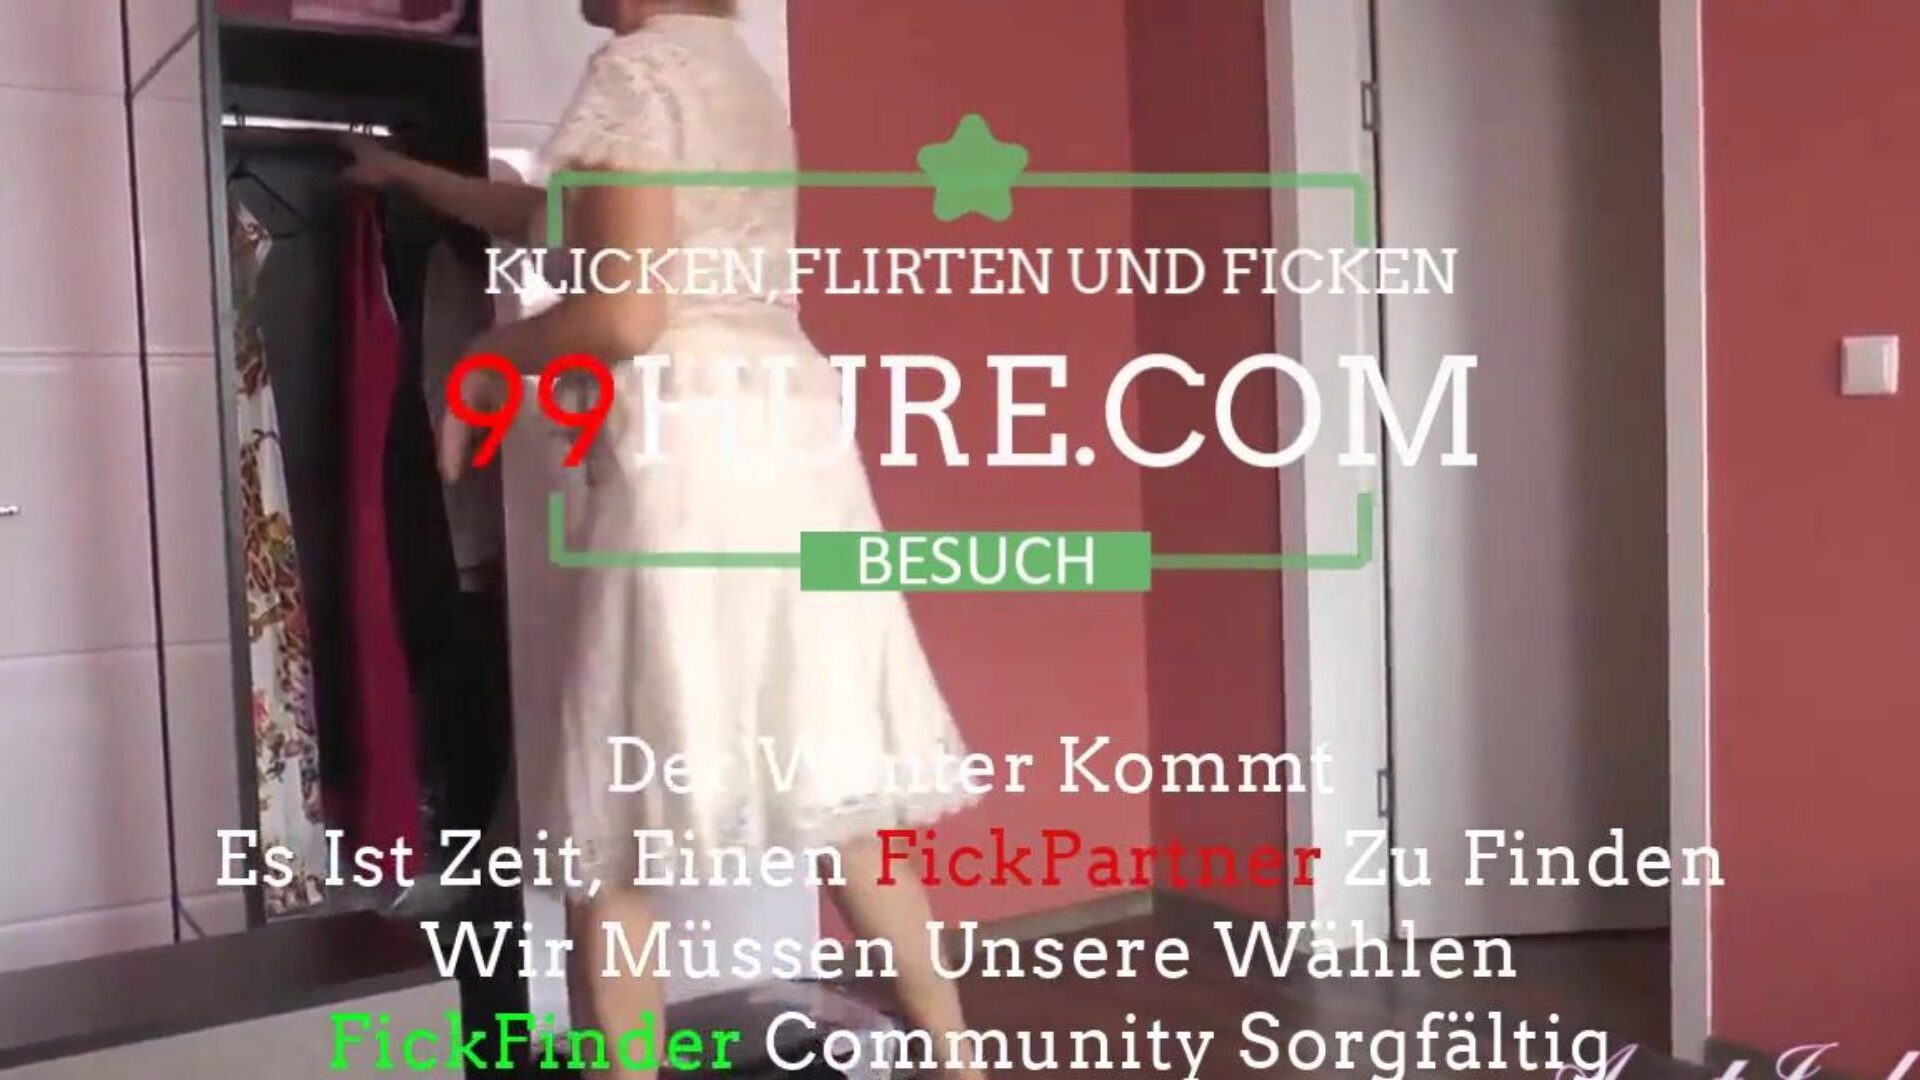 Die 56 Jahrige Stepauntie Aliona Erwischt Den Neffen... Watch Die 56 Jahrige Stepauntie Aliona Erwischt Den Neffen movie scene on xHamster - the ultimate archive of free-for-all German Mom HD hard-core porn tube clips